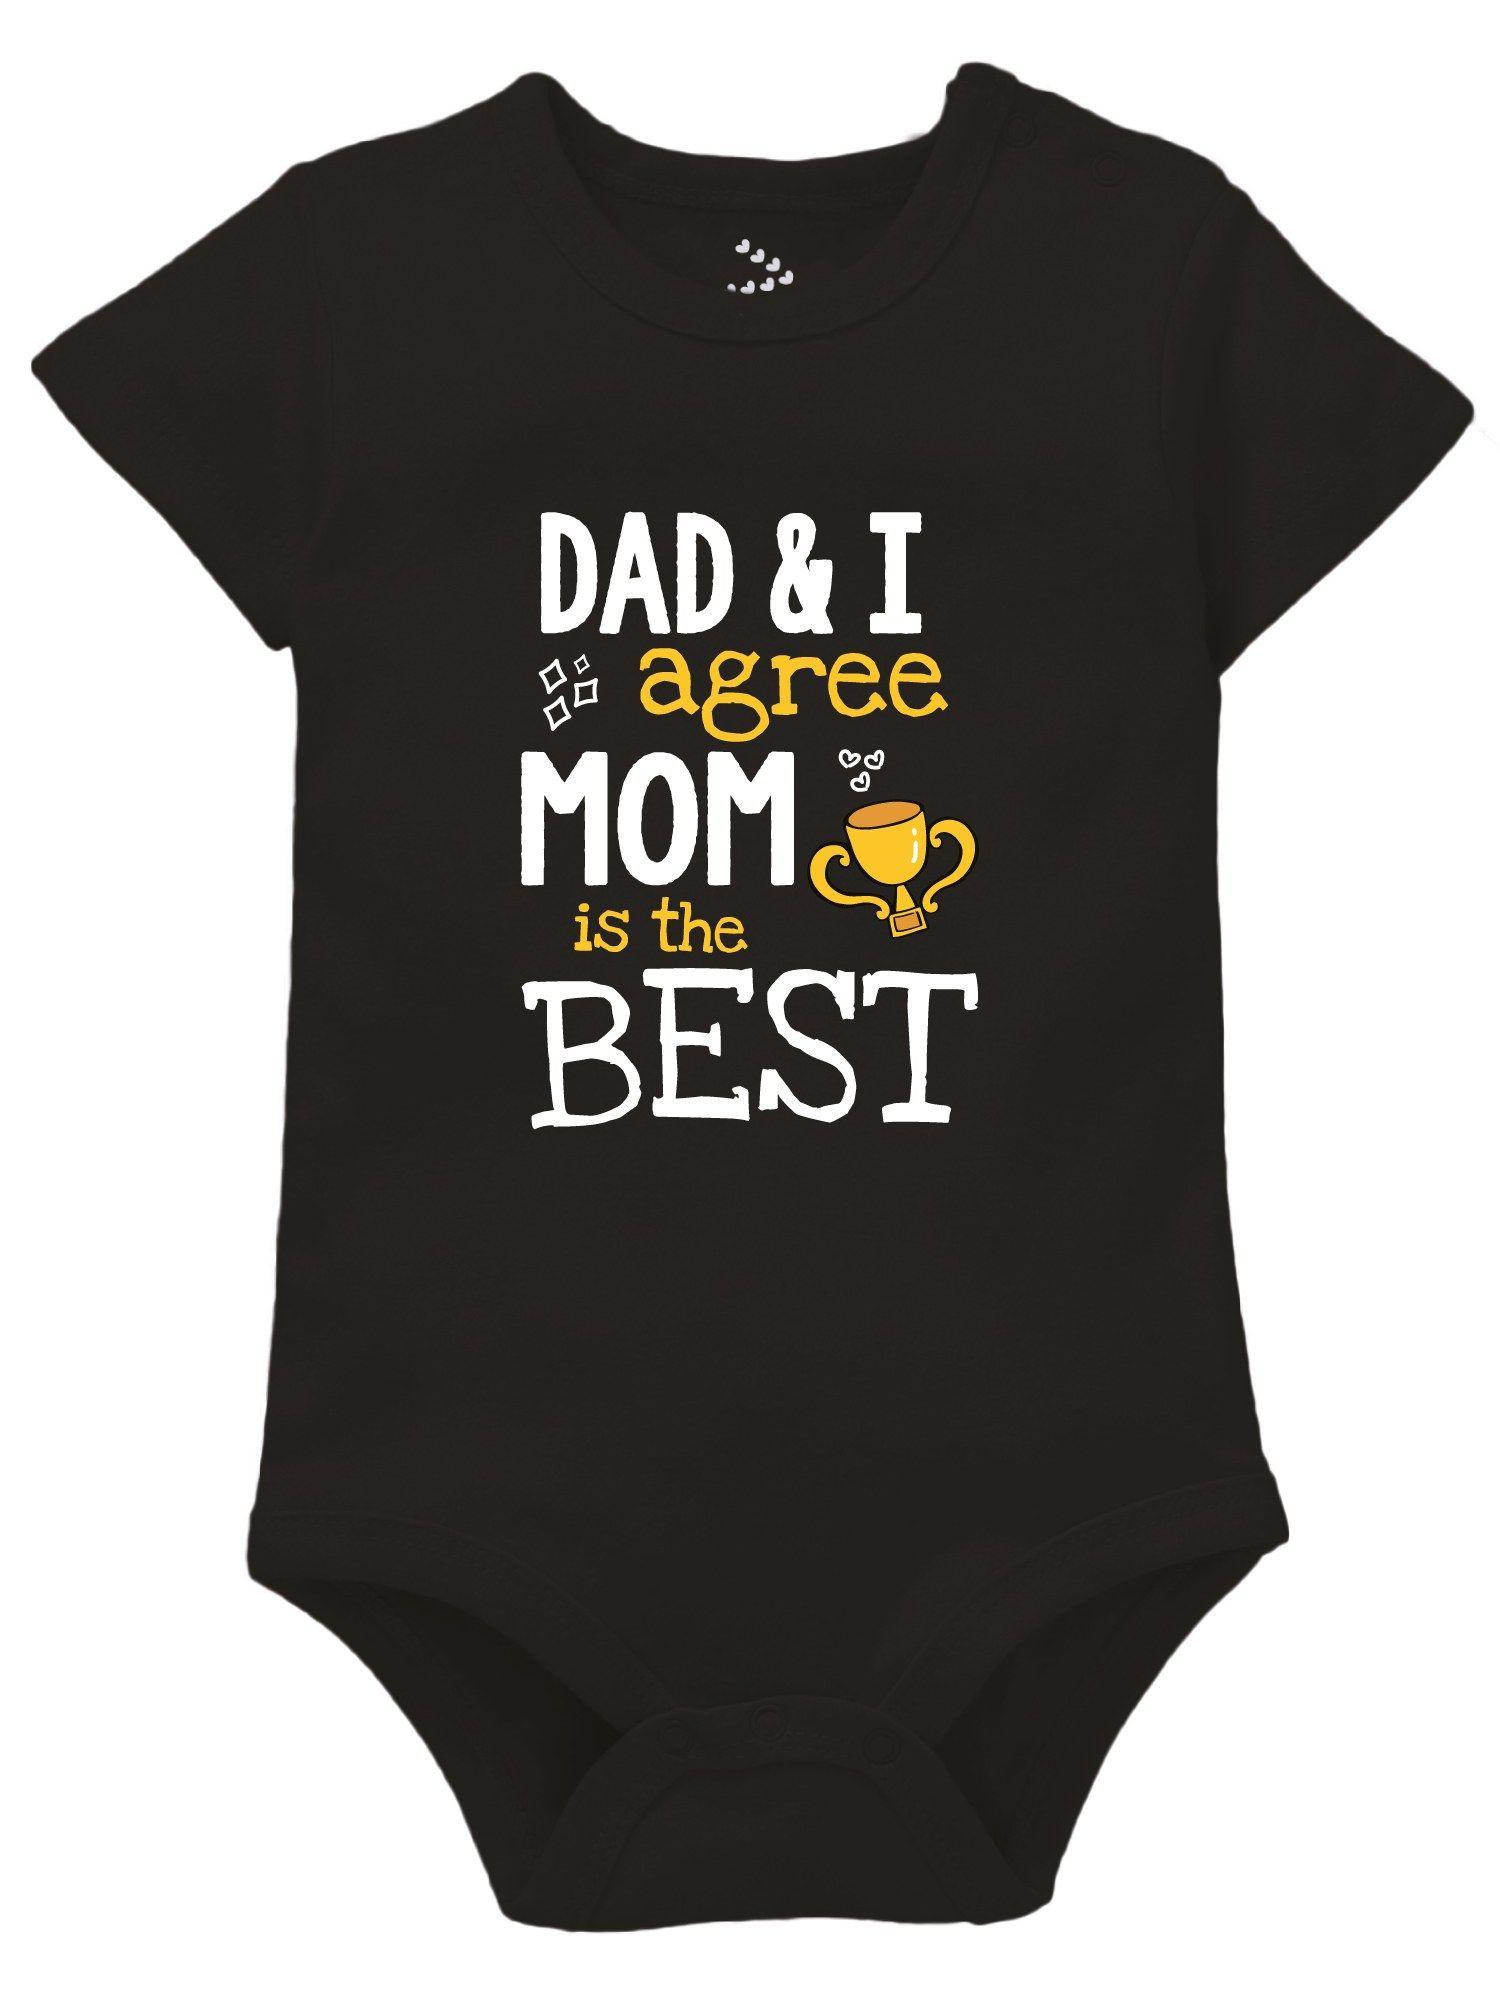 dad & i agree mom is the best mothers day baby black